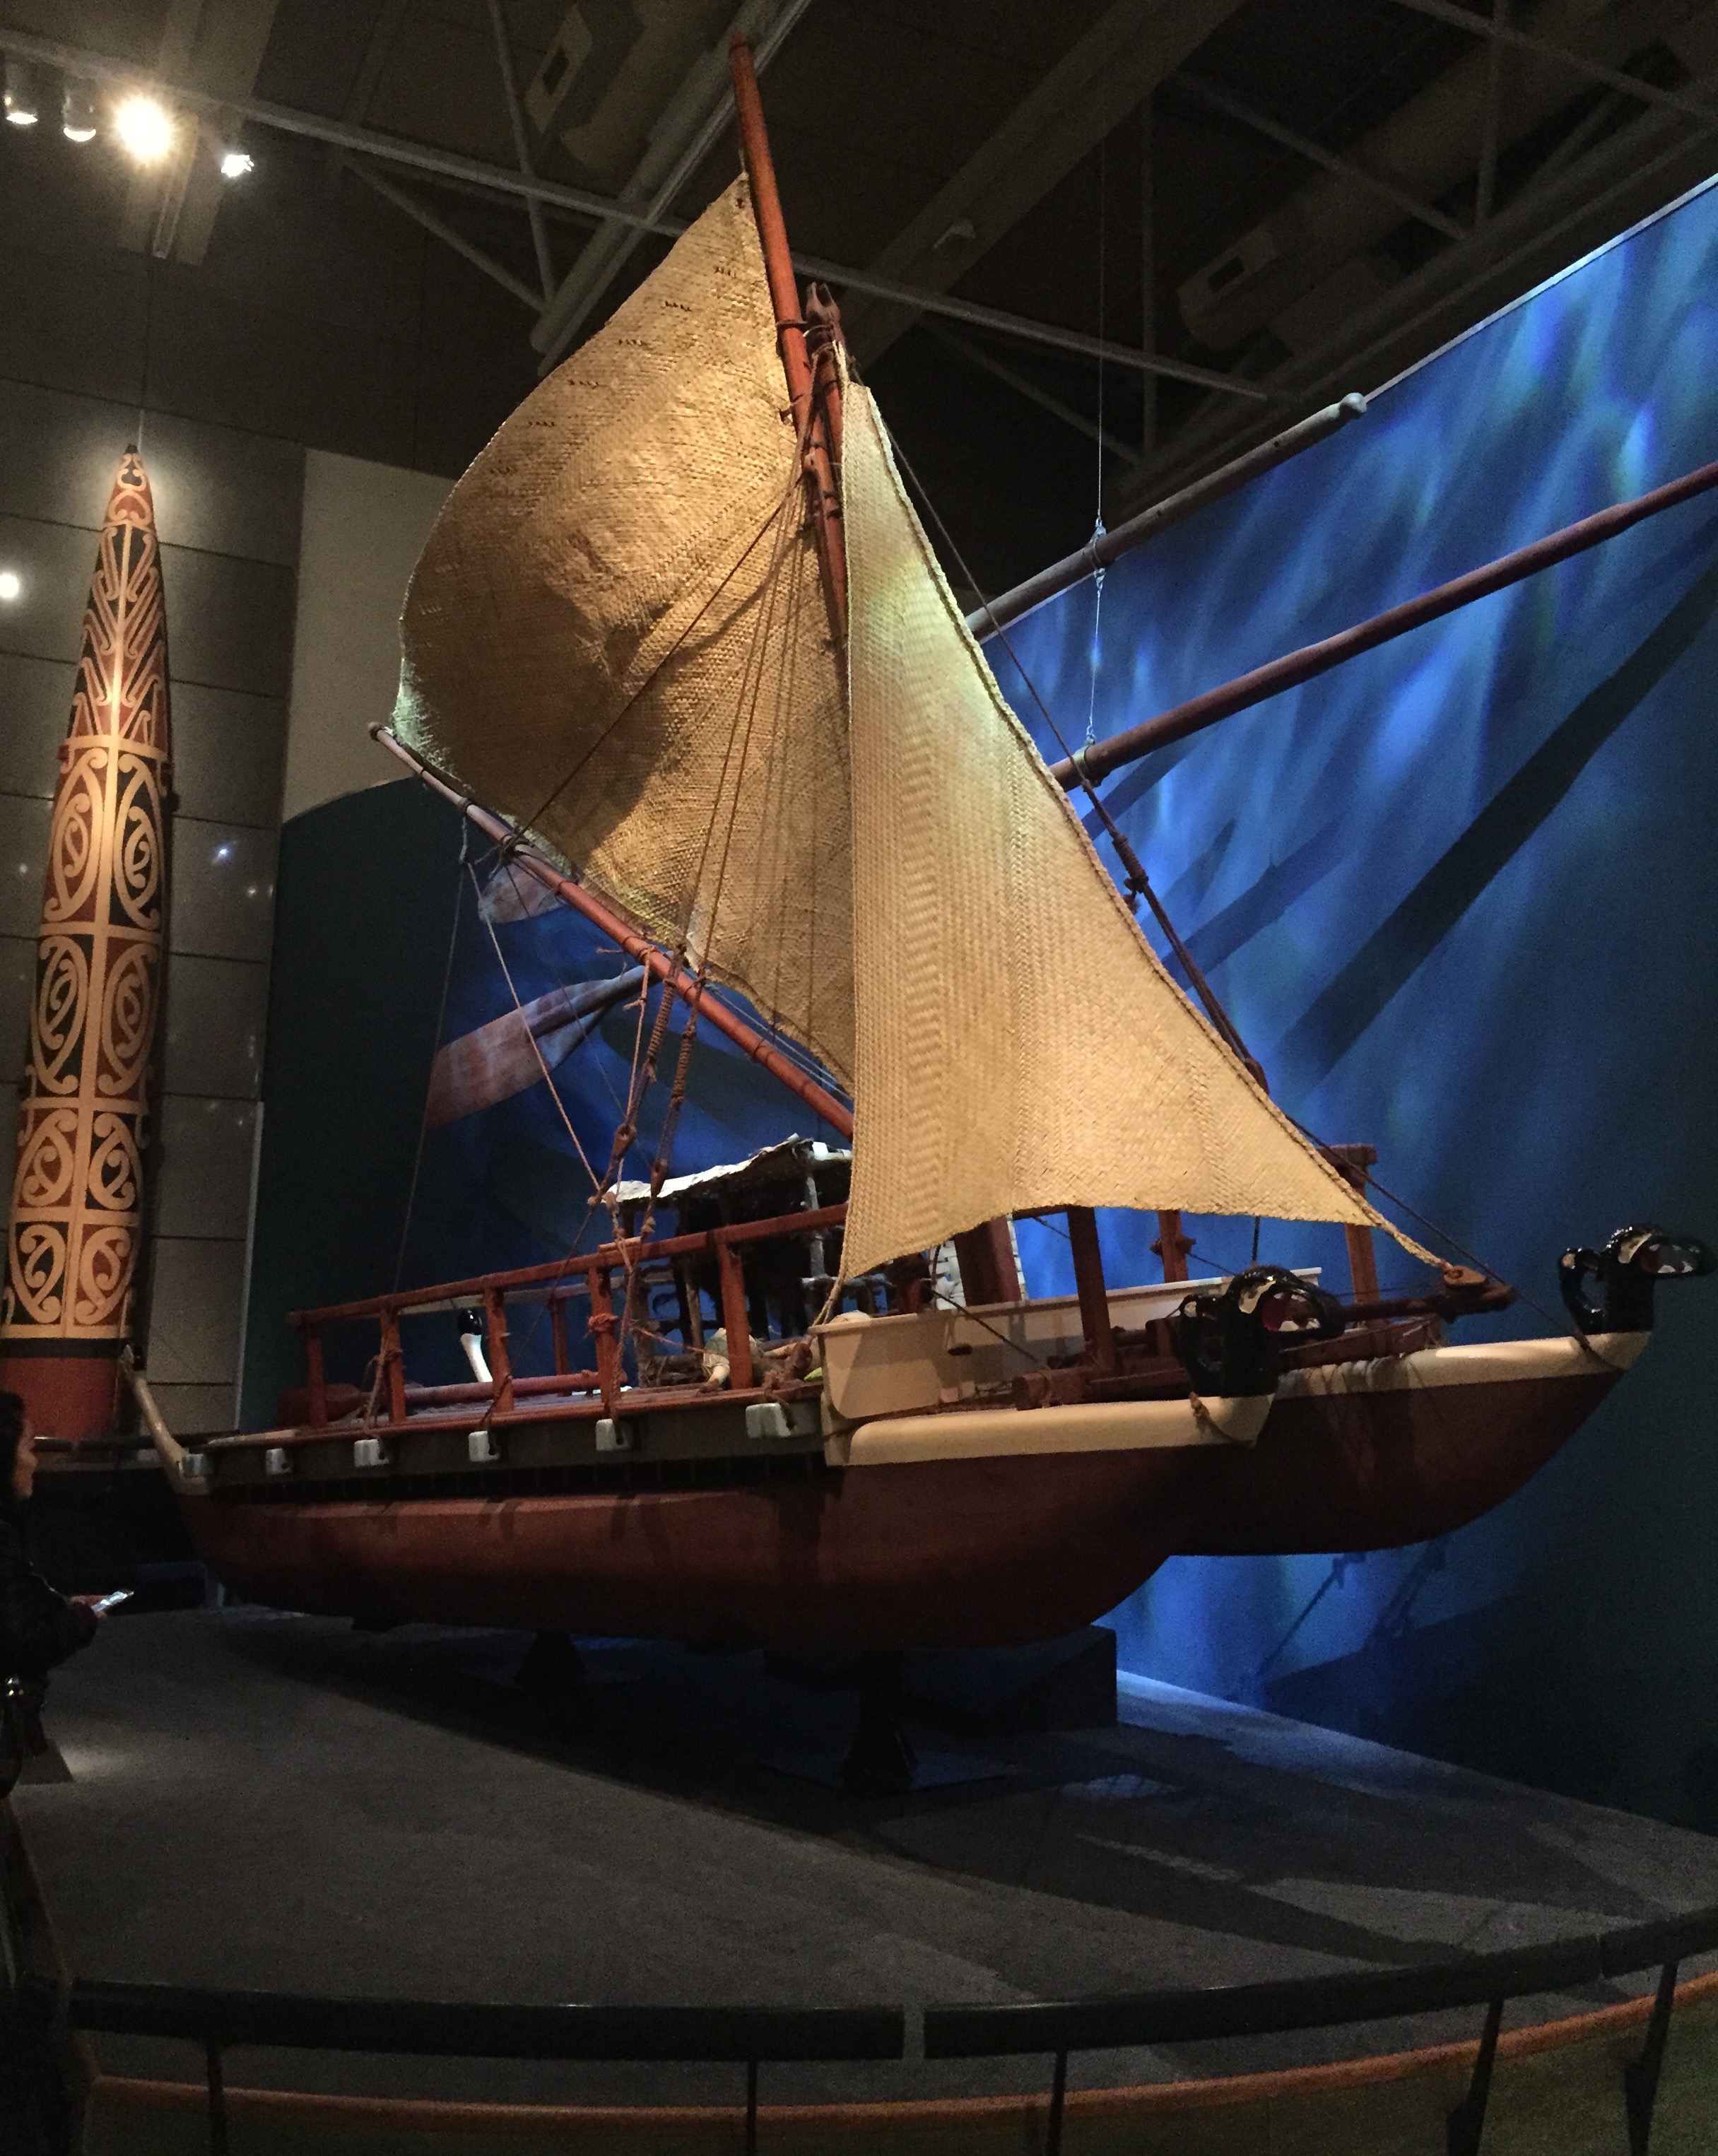 A boat from my favorite Māori cultural history exhibit.